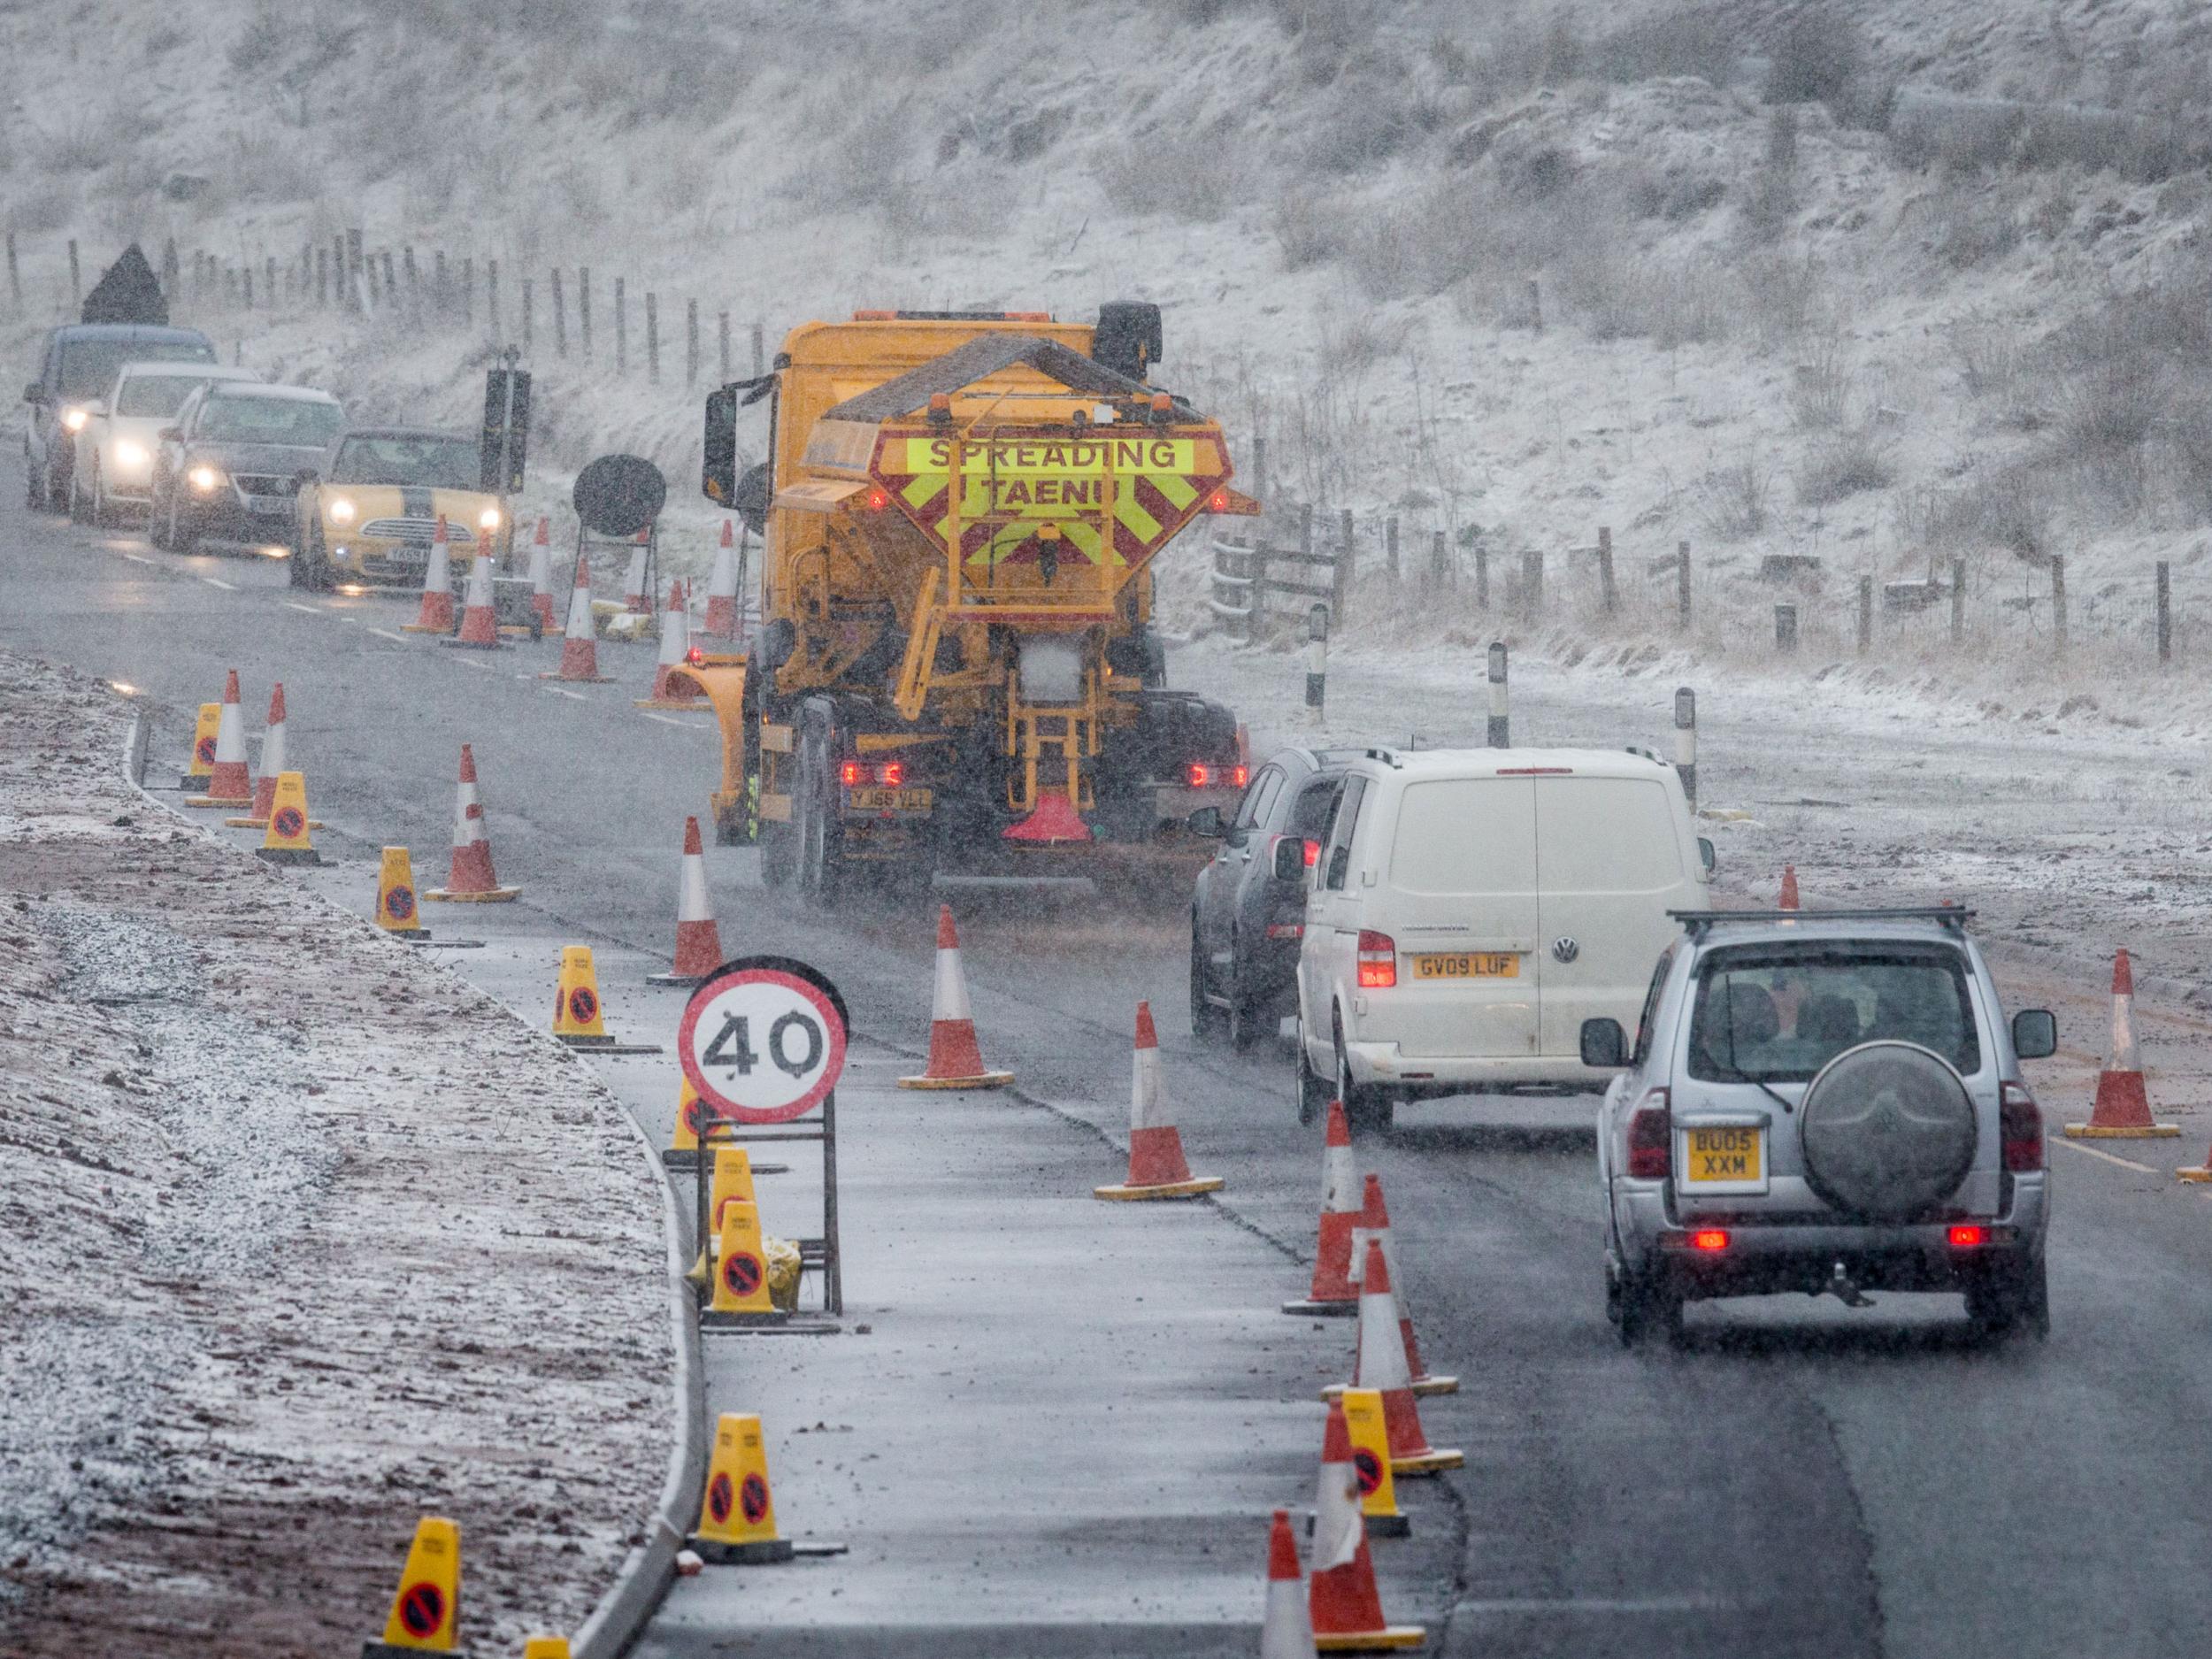 UK weather latest: Snow continuing to delay flights, close schools and cause travel woes